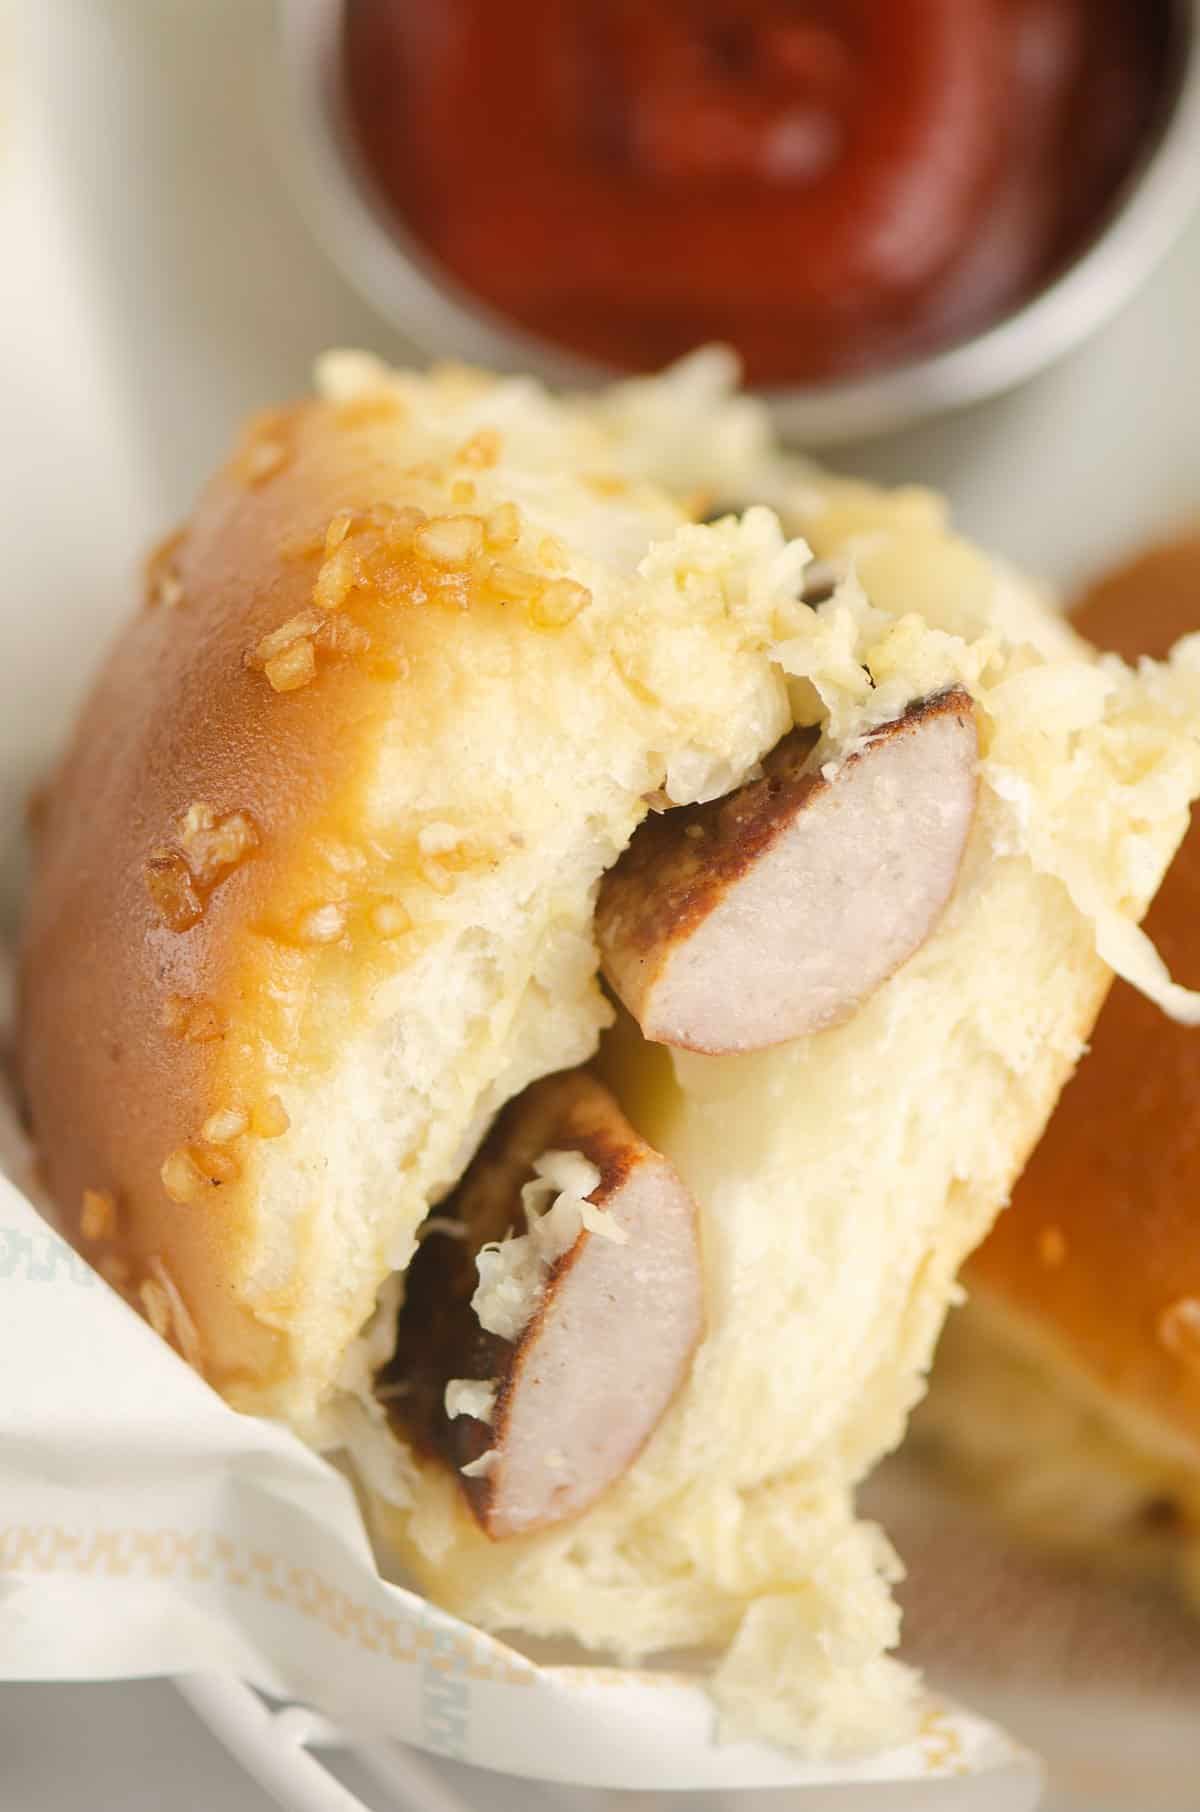 brat slider in tray with ketchup